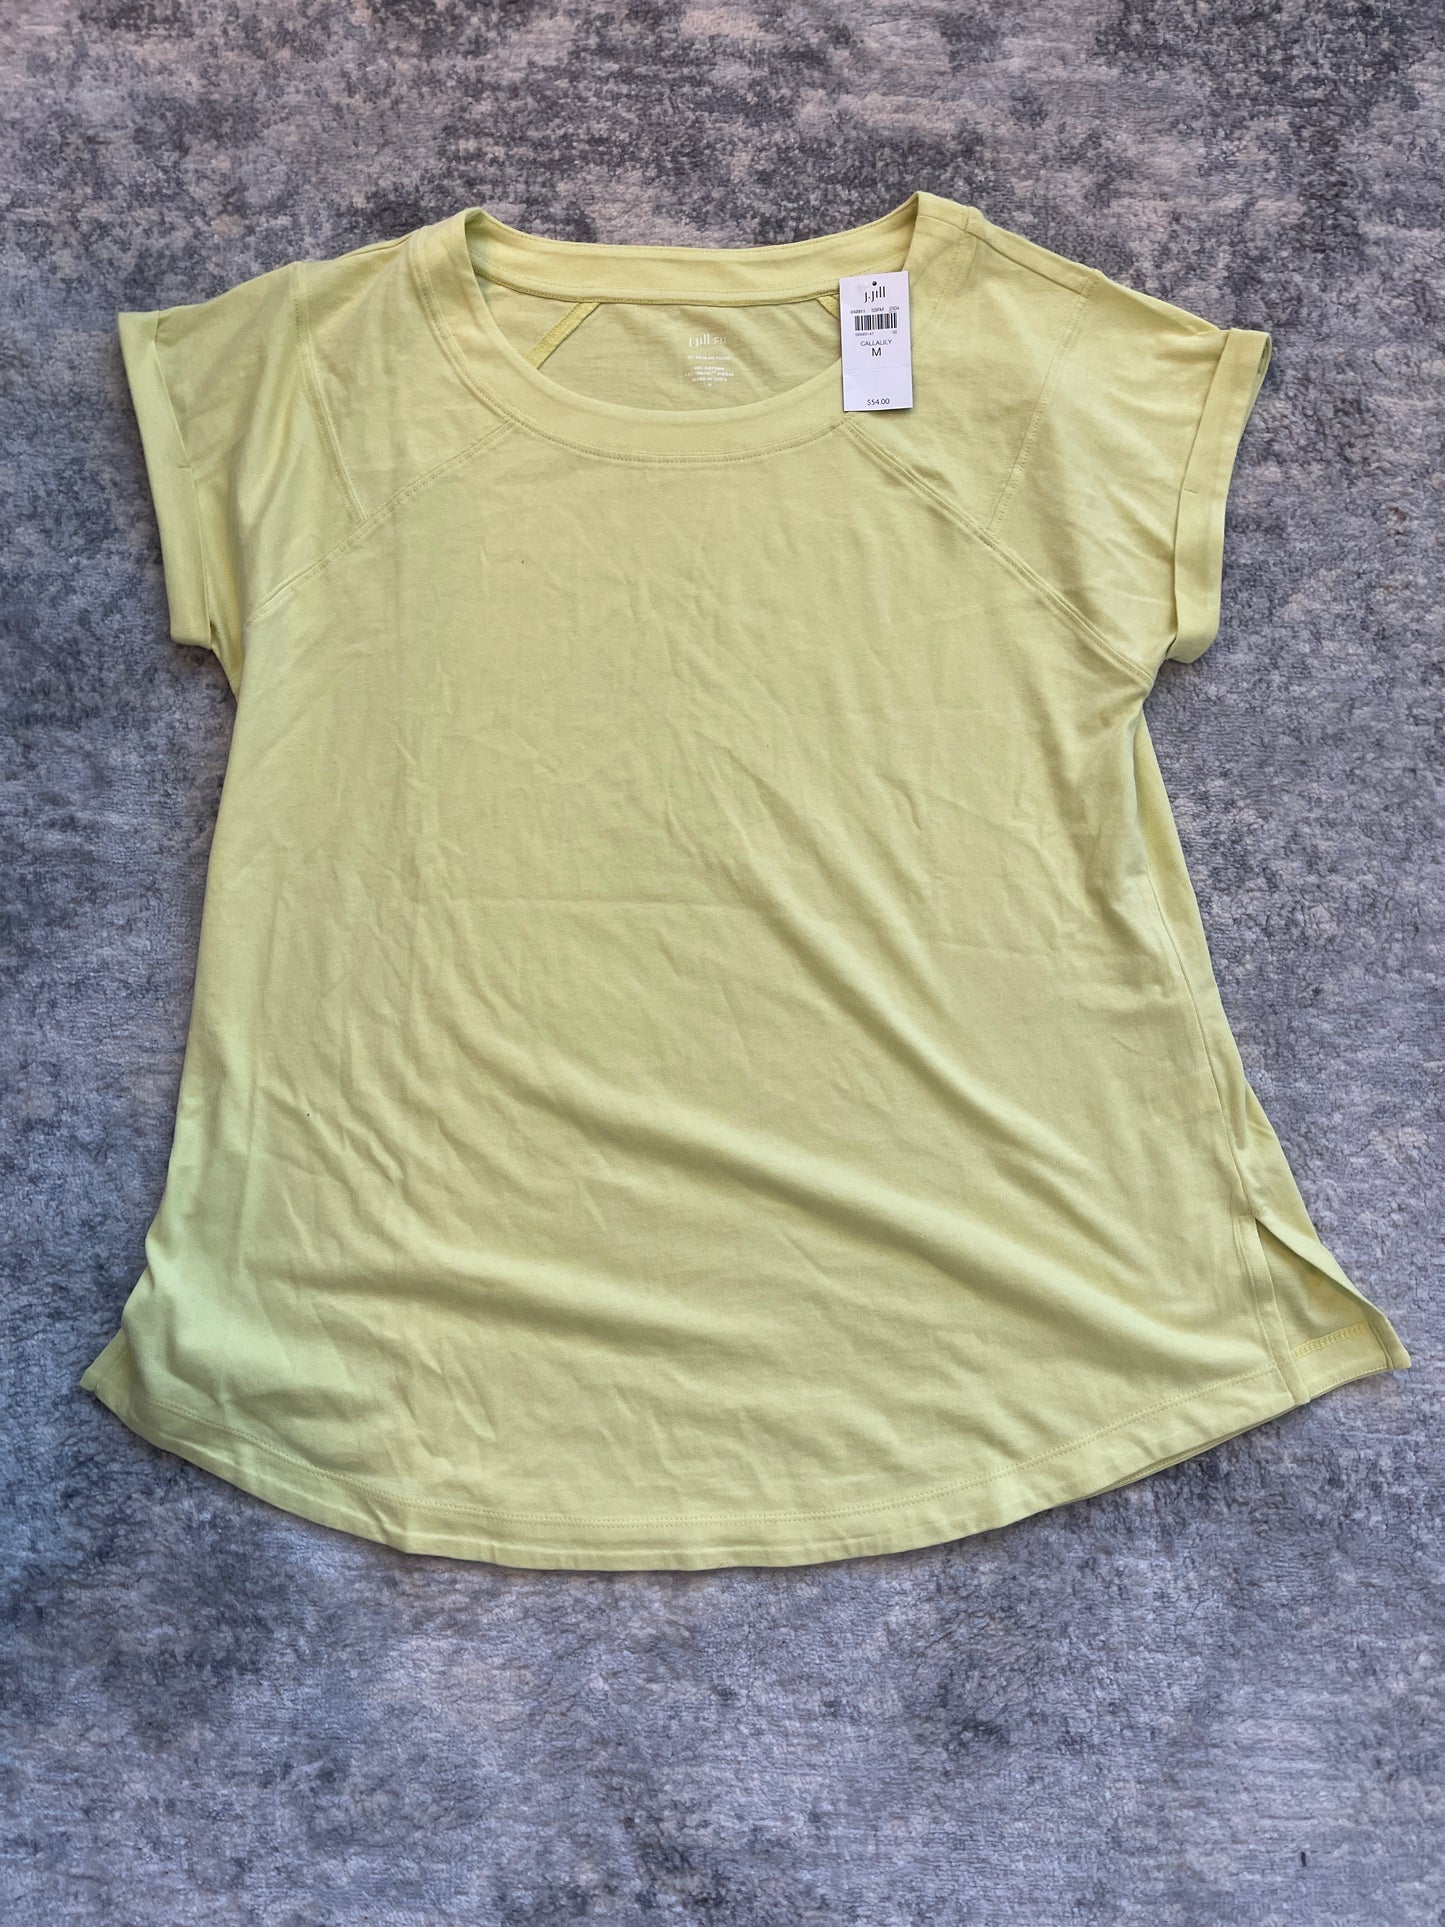 J. Jill Women’s Yellow Short-Sleeved Top Size M (fits more like an L) - PPU Montgomery